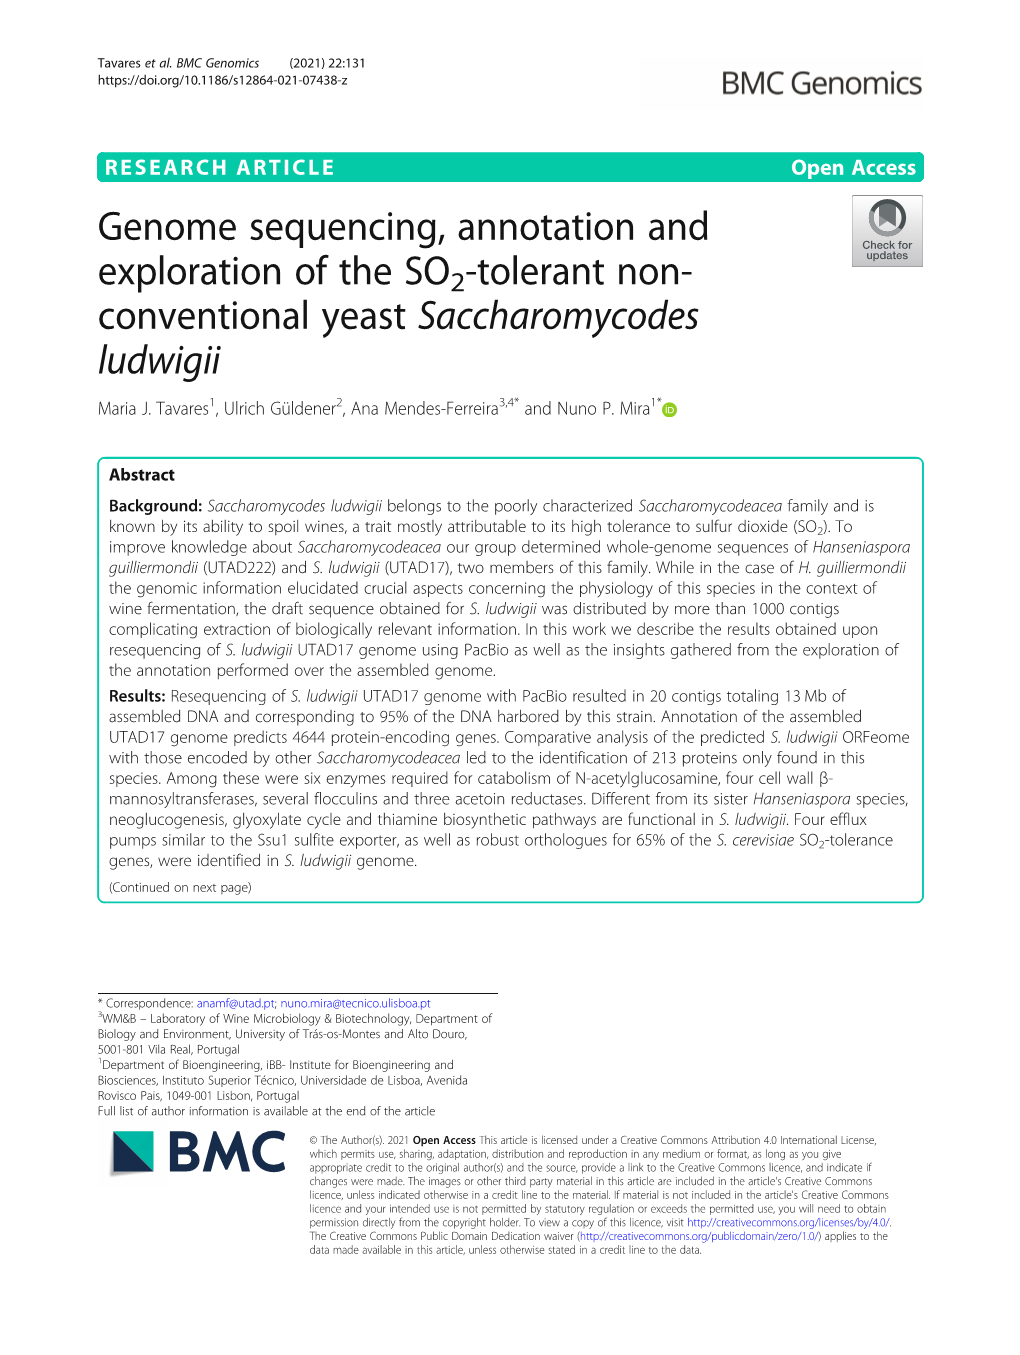 Genome Sequencing, Annotation and Exploration of the SO2-Tolerant Non- Conventional Yeast Saccharomycodes Ludwigii Maria J